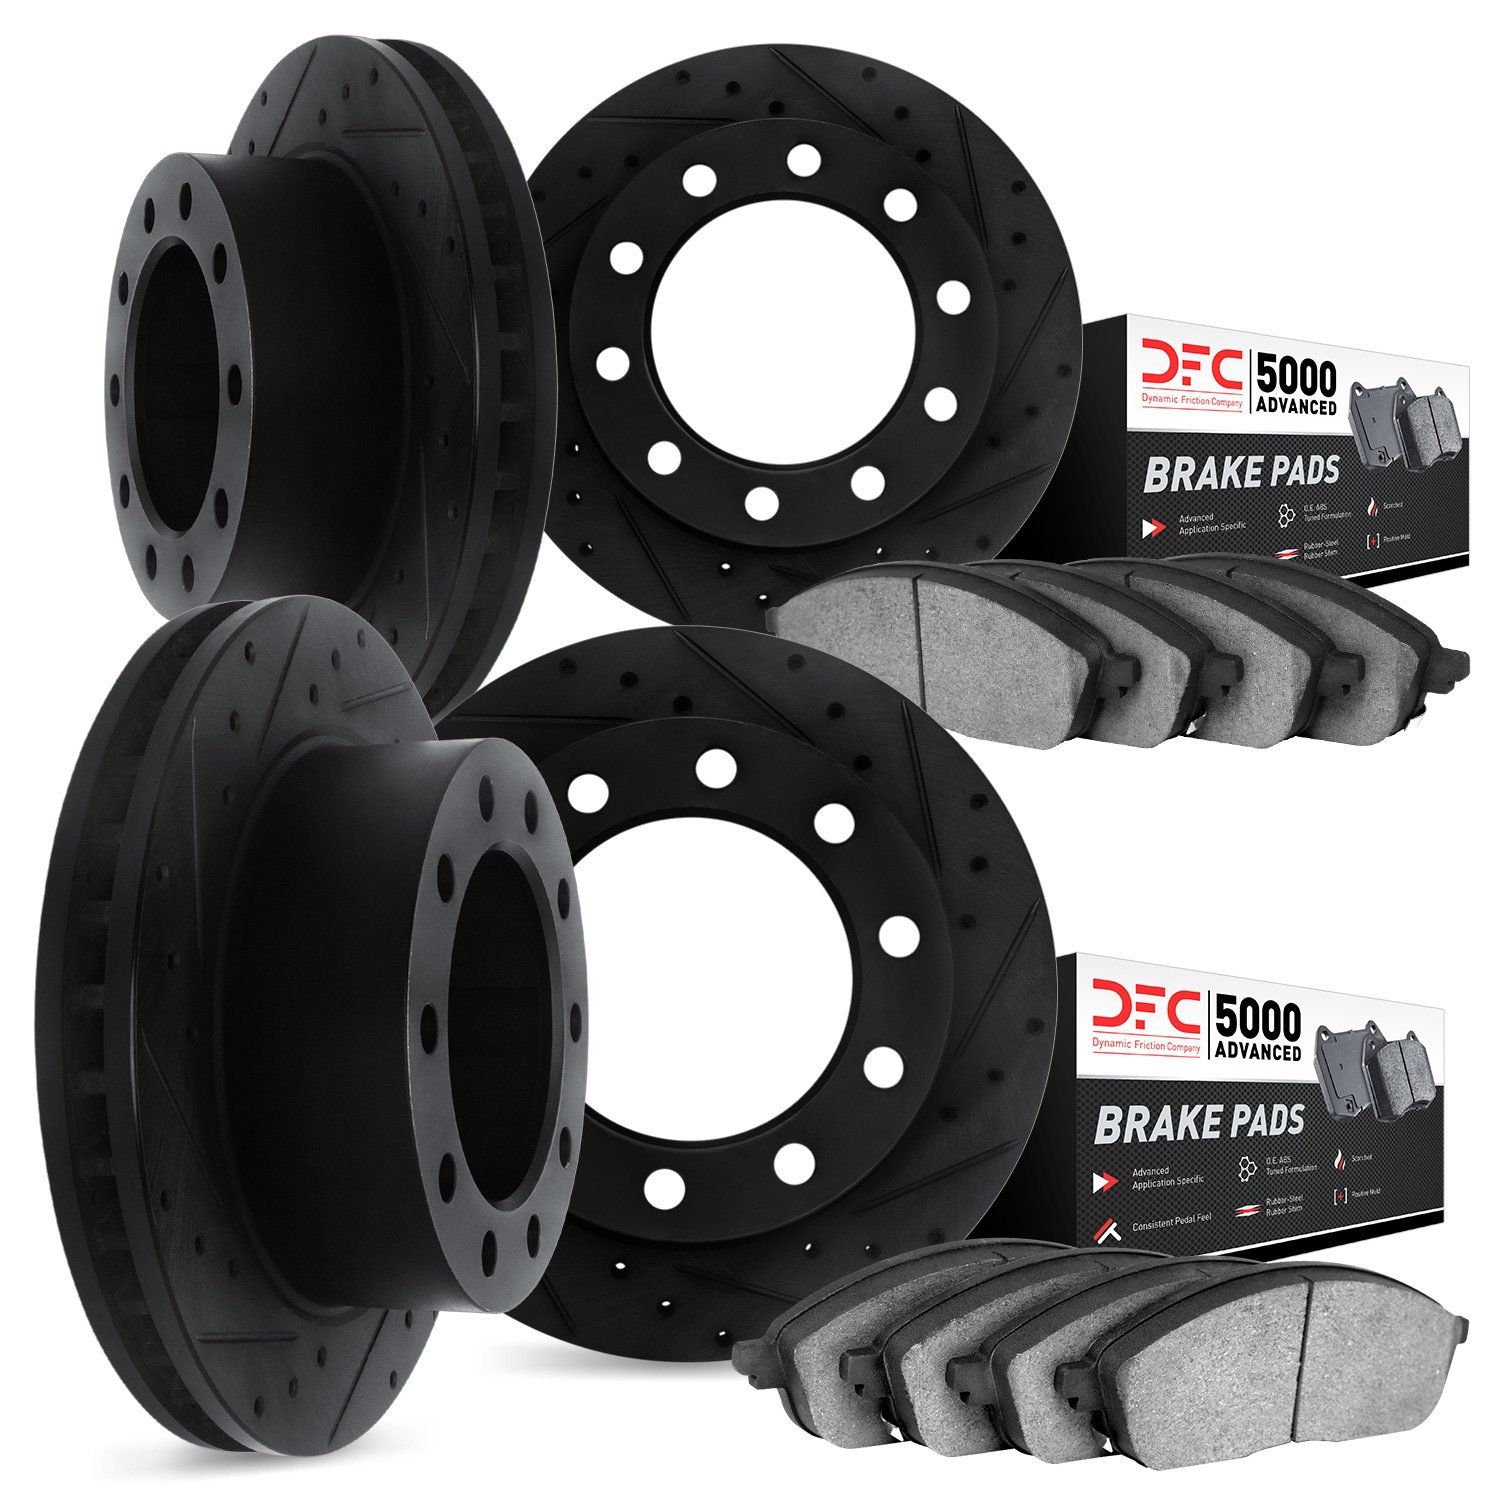 8504-54397 Drilled/Slotted Brake Rotors w/5000 Advanced Brake Pads Kit [Black], Fits Select Ford/Lincoln/Mercury/Mazda, Position